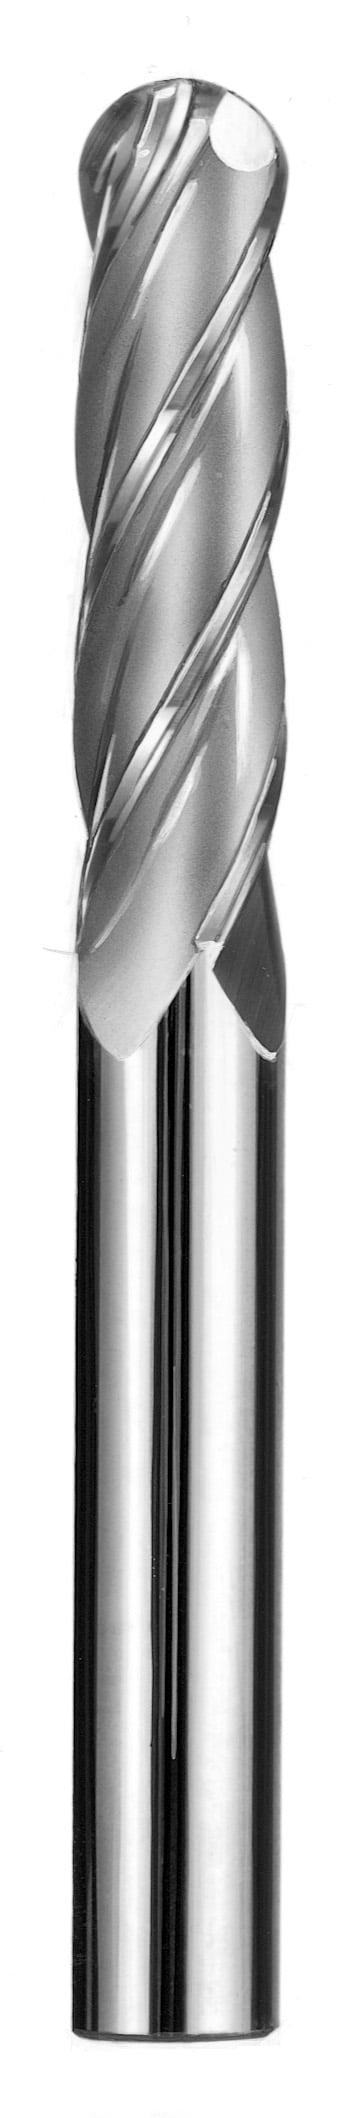 5/16" Dia, 4 Flute, Ball Nose End Mill - 93332